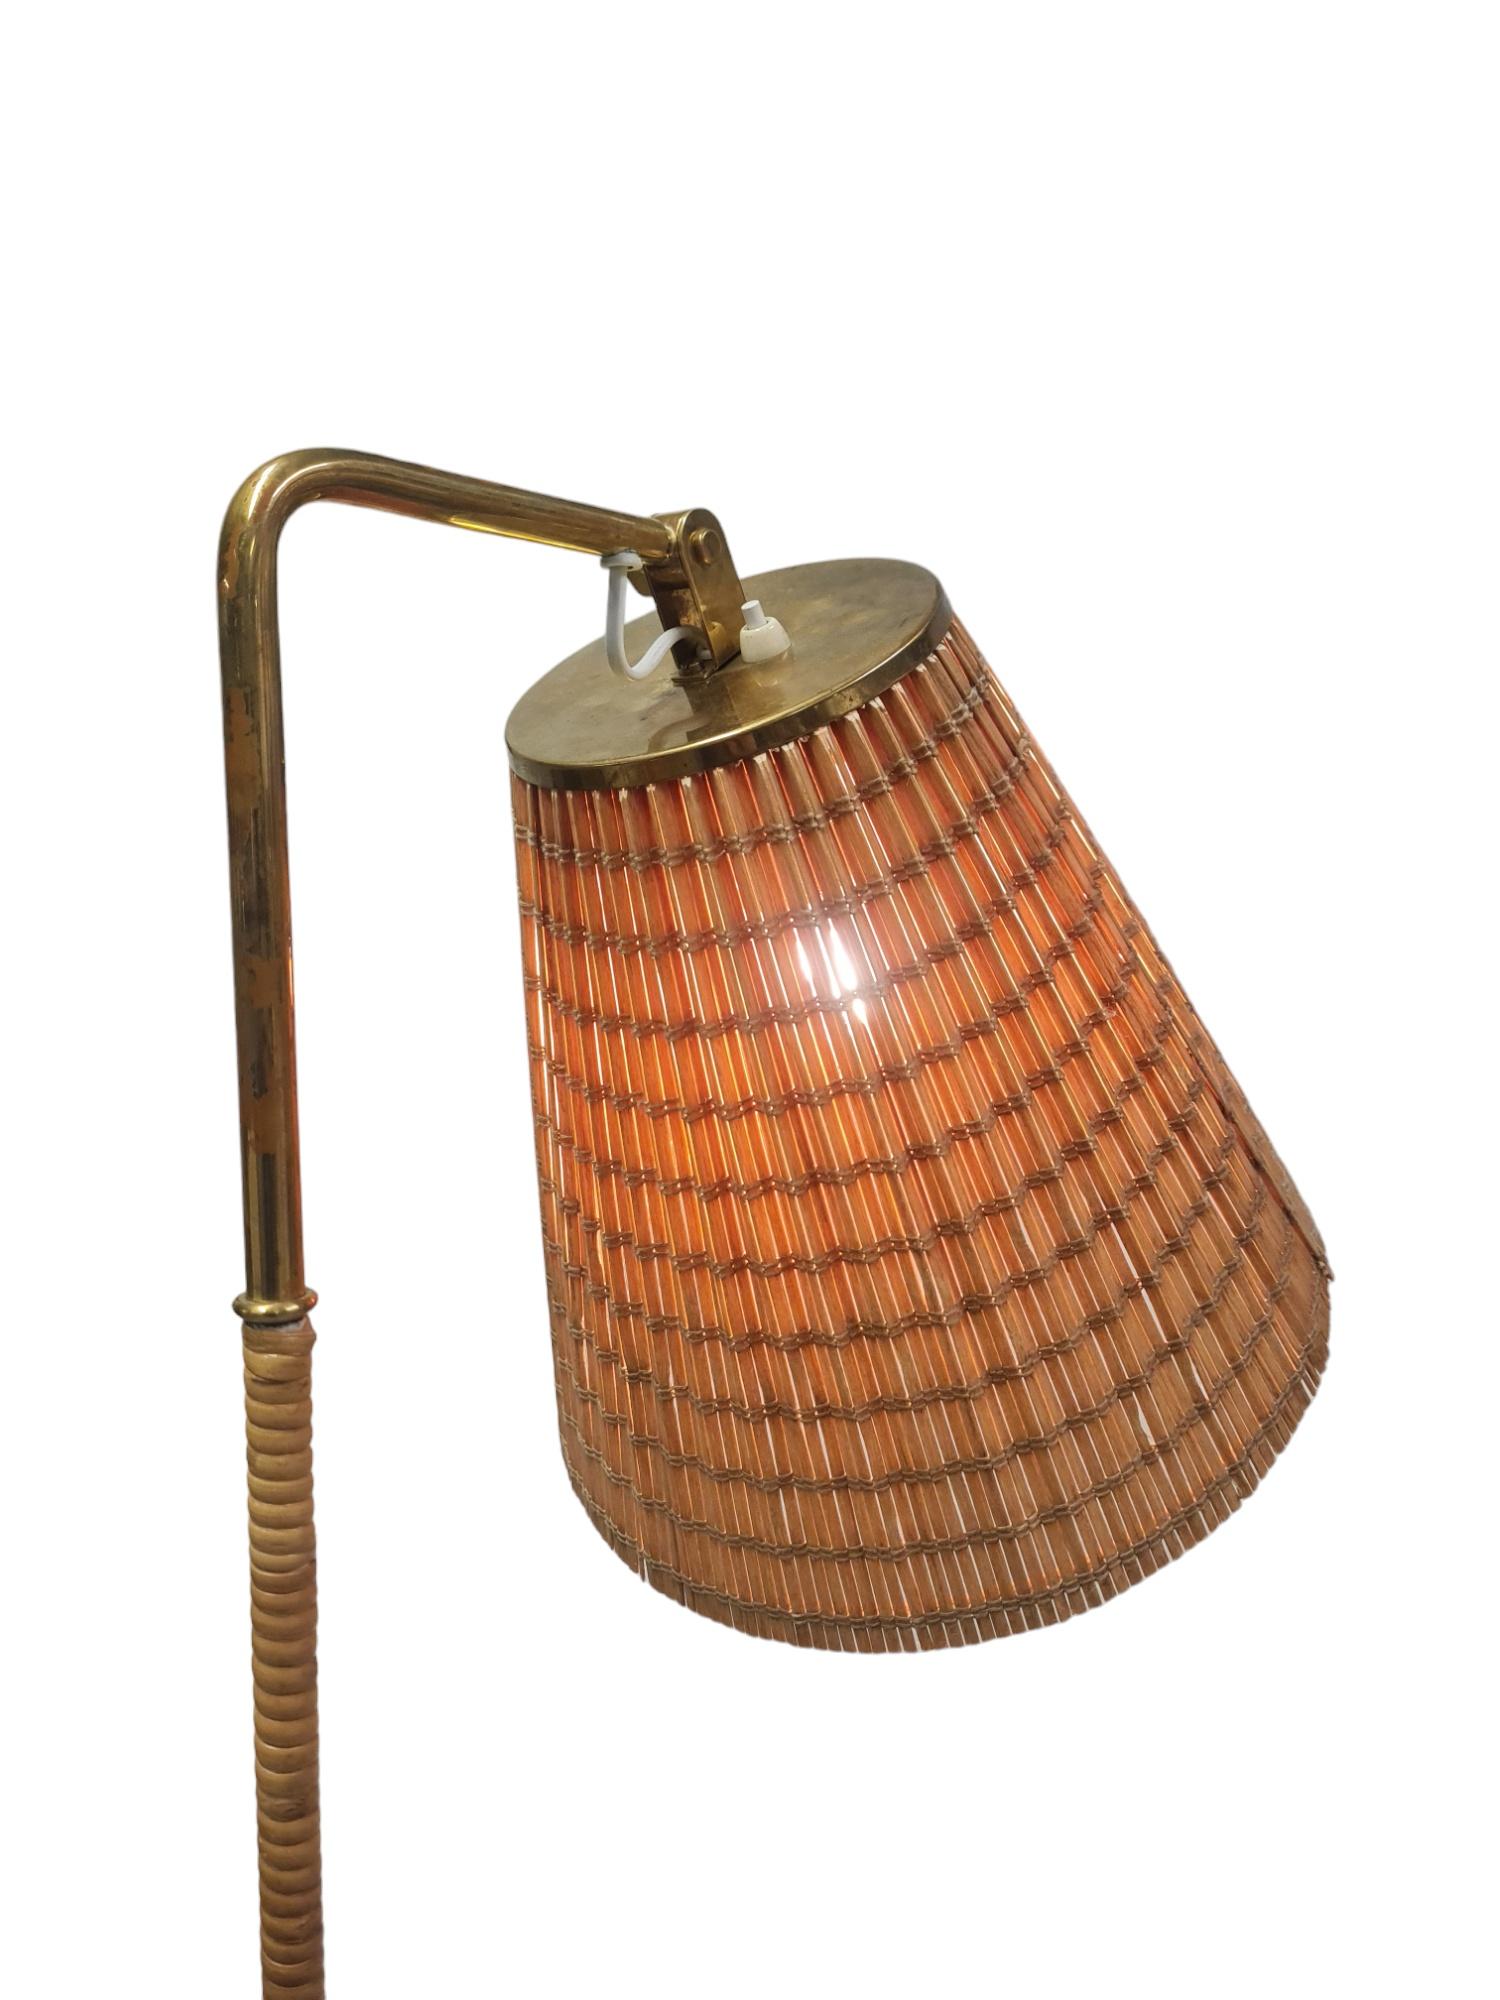 A very rare, but one of the best and most iconic floor lamps by Paavo Tynell. This model 9631 lamp is in great original condition straight from the 1950s, apart from the wires and shade which have been changed. The lamp shade is of course made